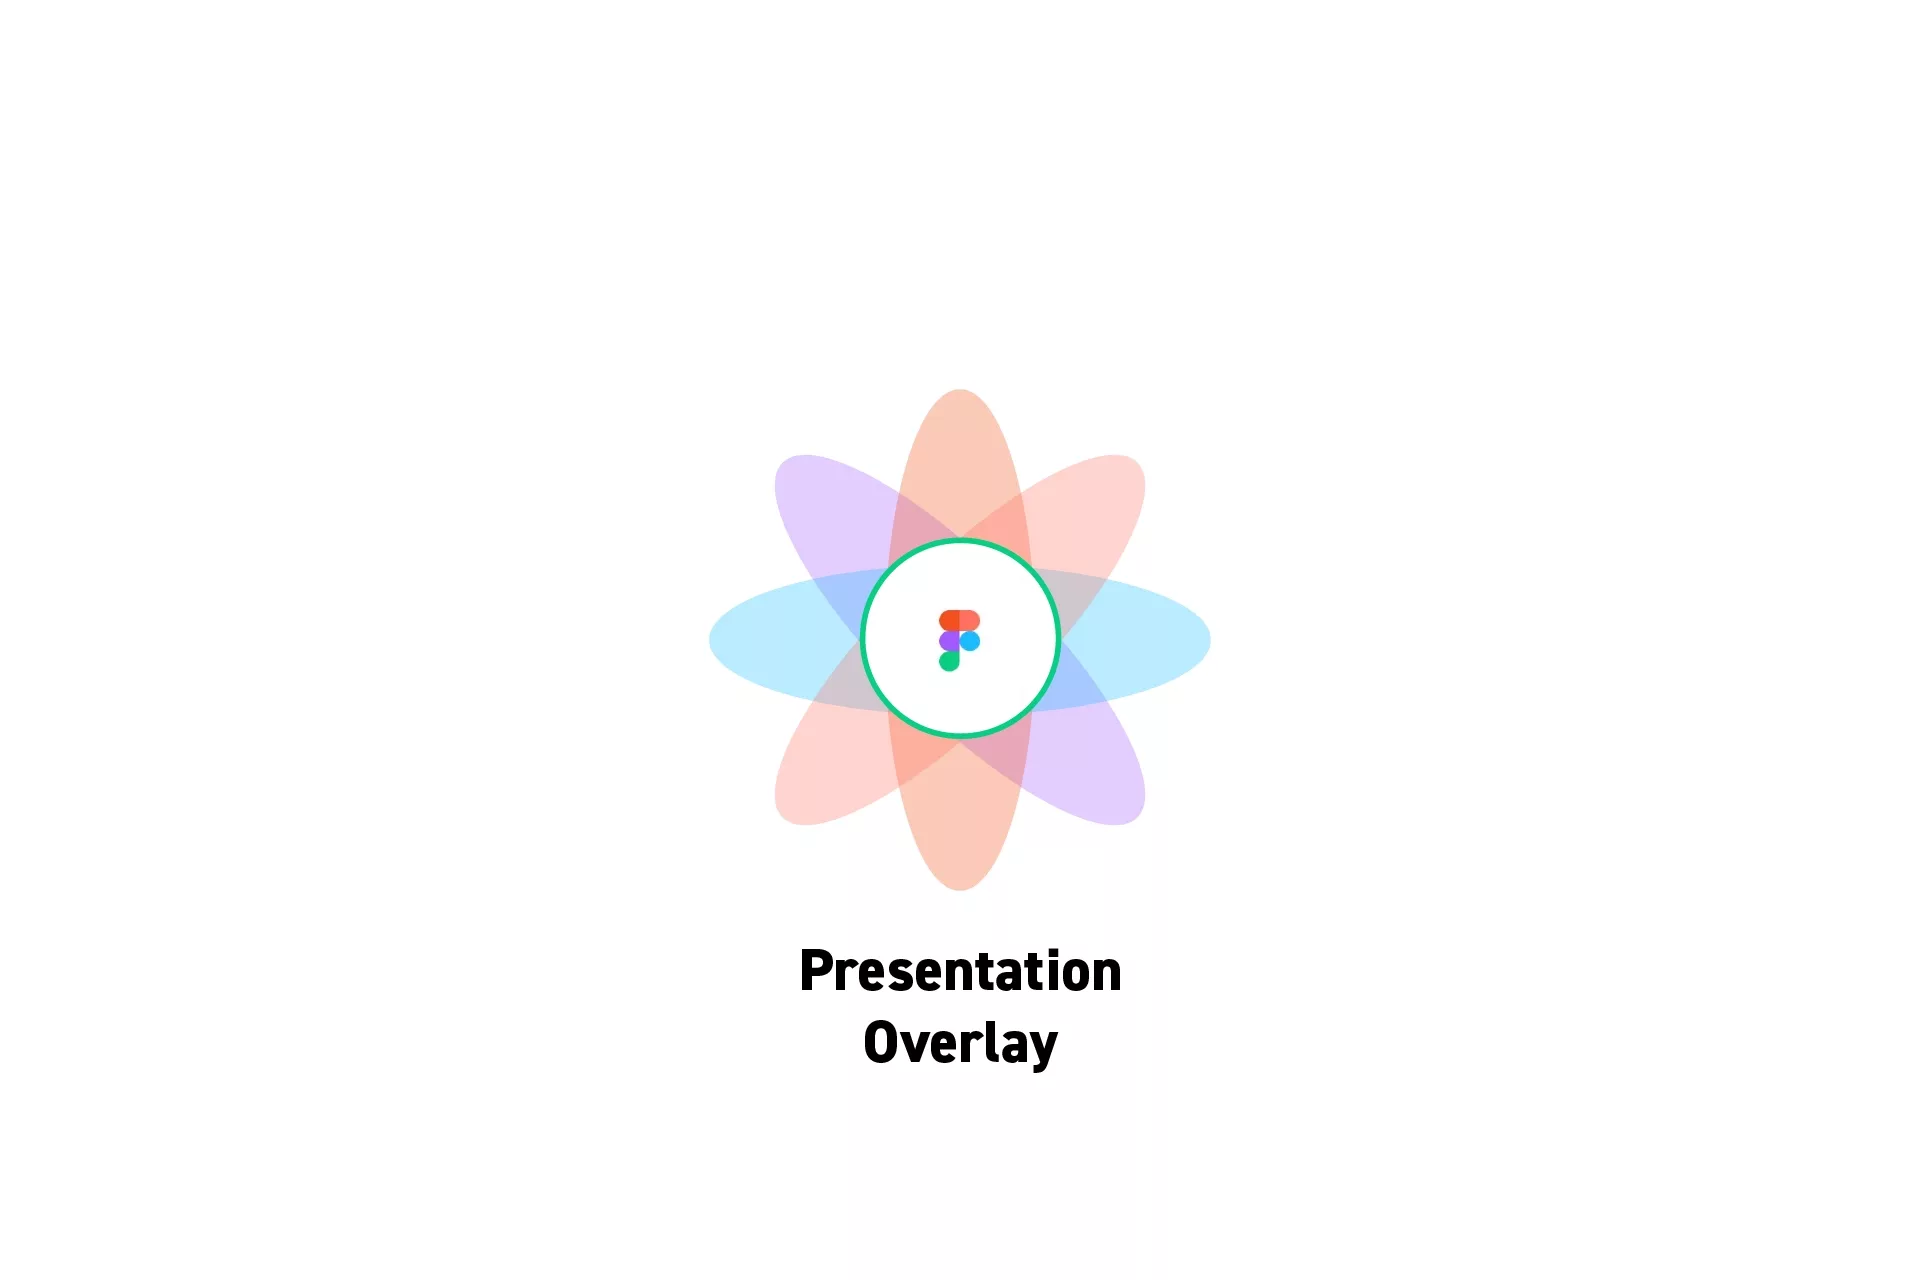 A flower that represents Figma with the text "Presentation Overlay" beneath it.